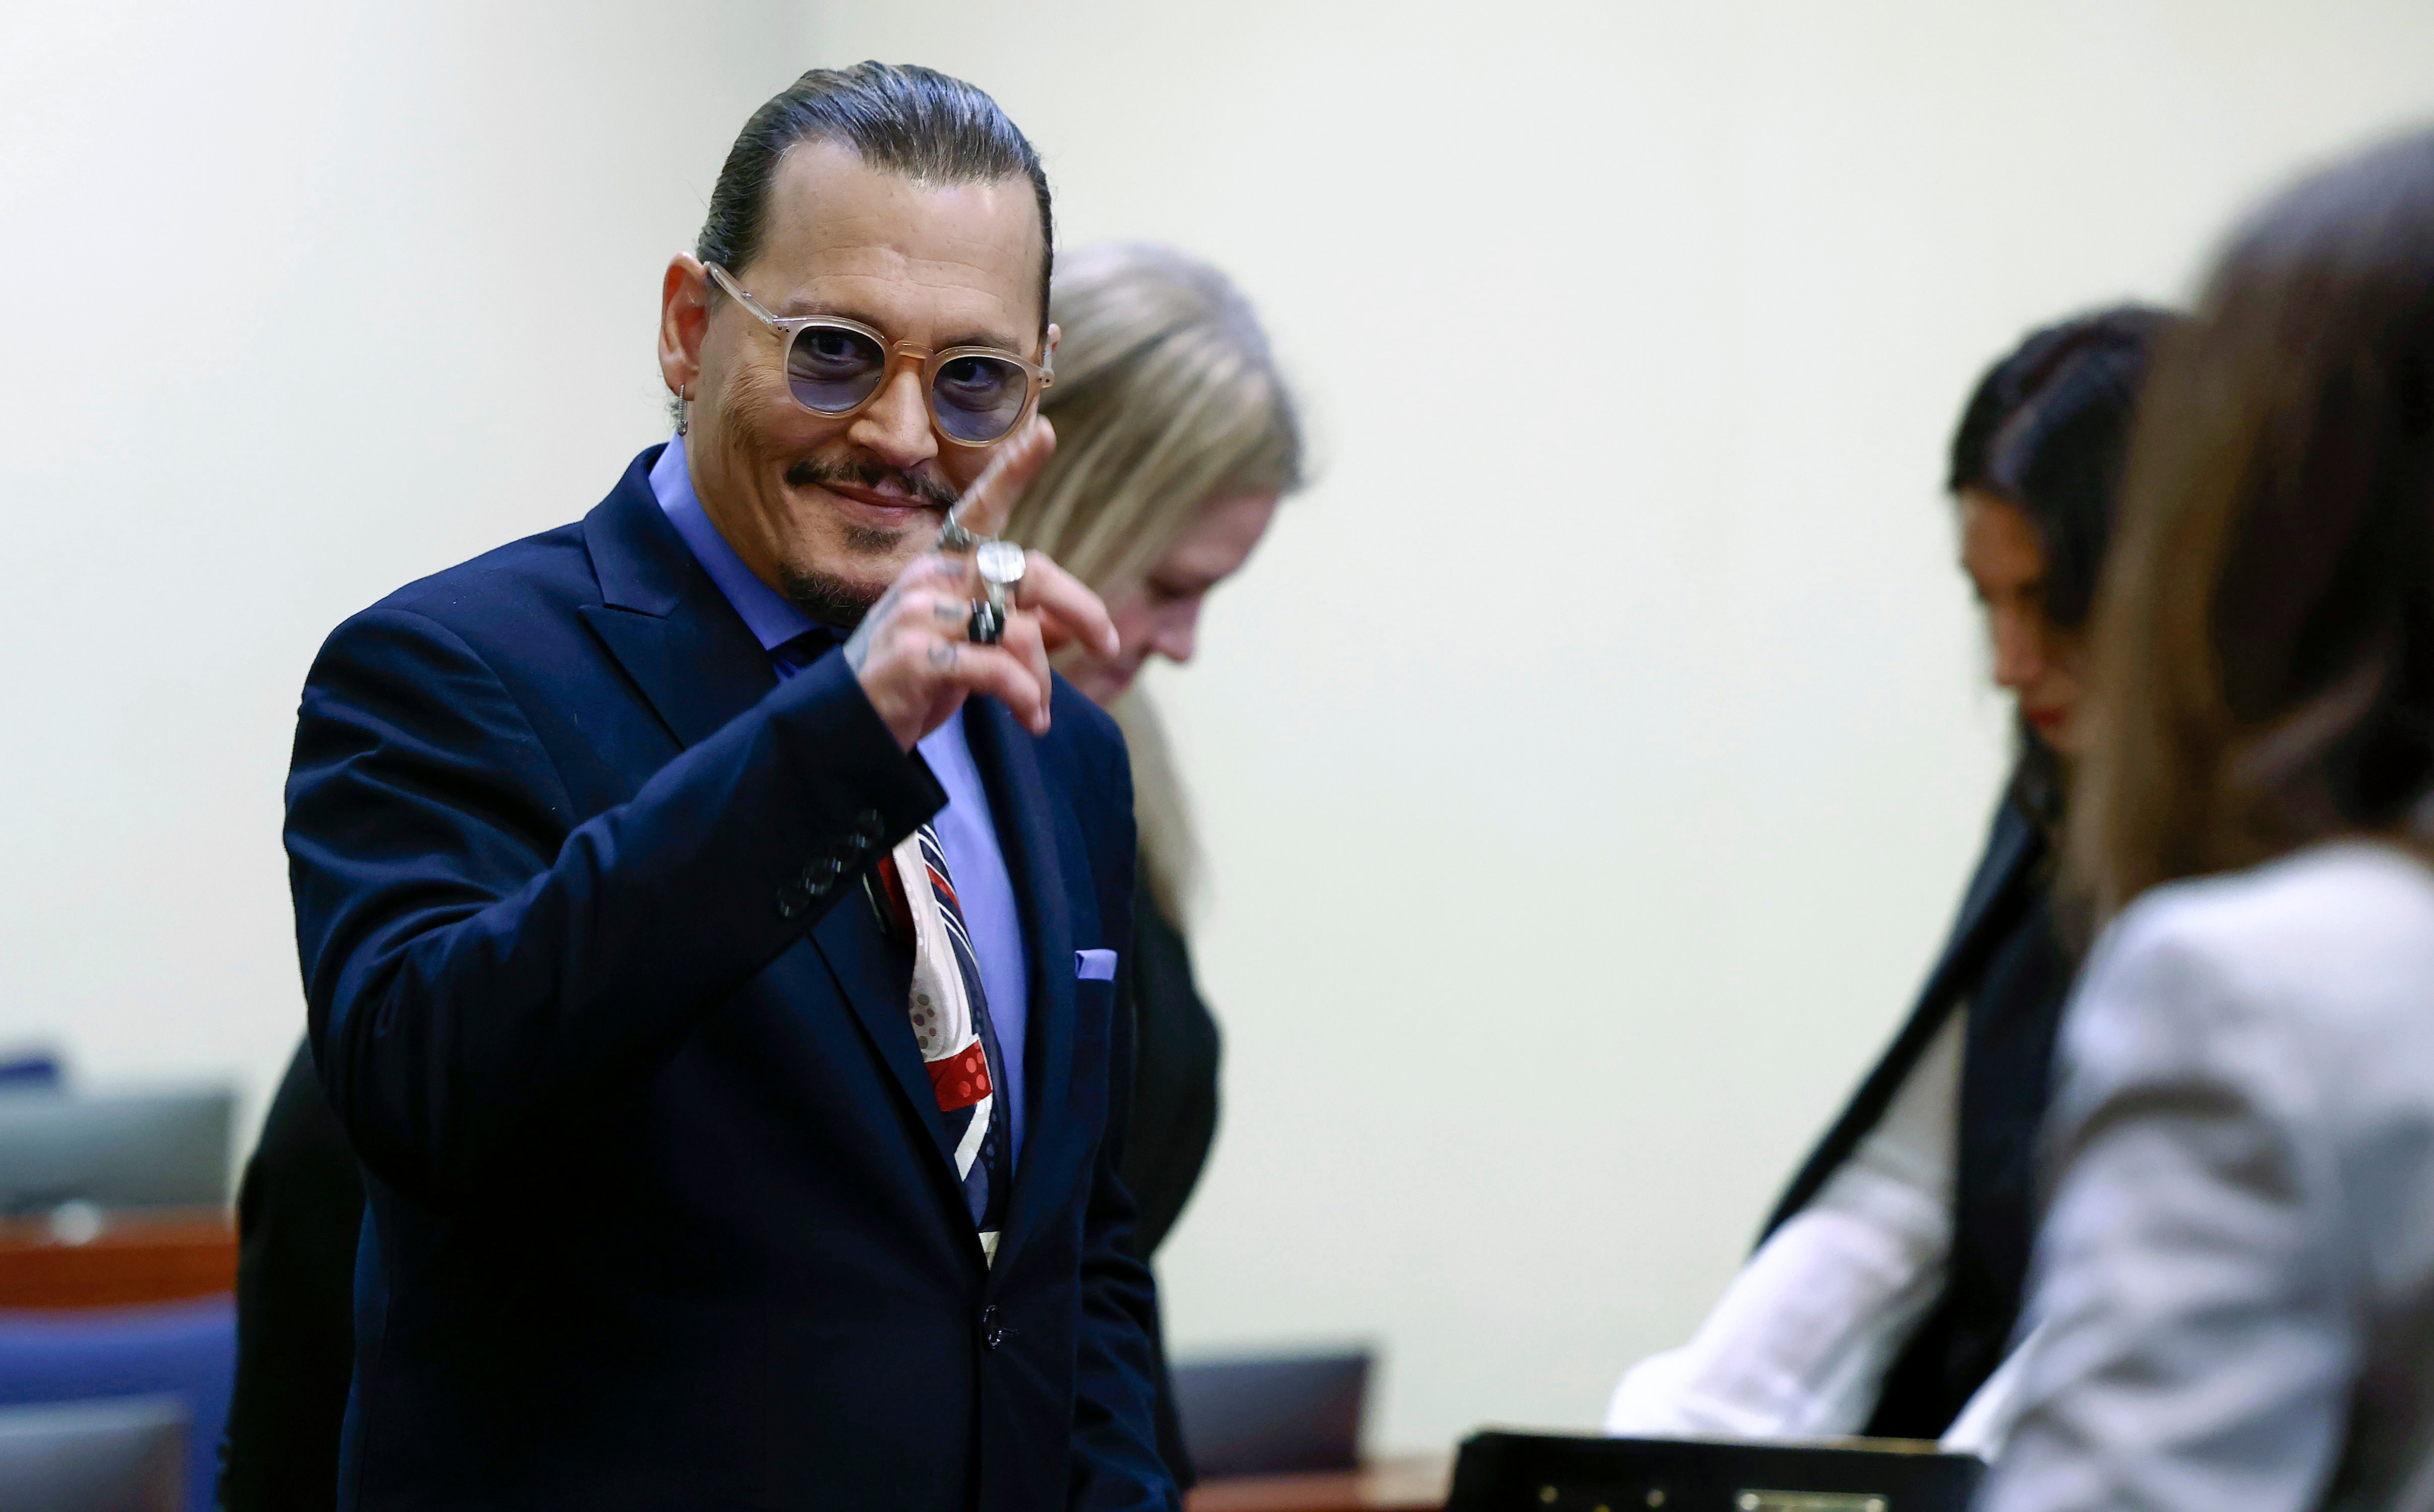 Mr Depp is suing Ms Heard for libel over a 2018 article she wrote in The Washington Post (Jim Lo Scalzo/AP)